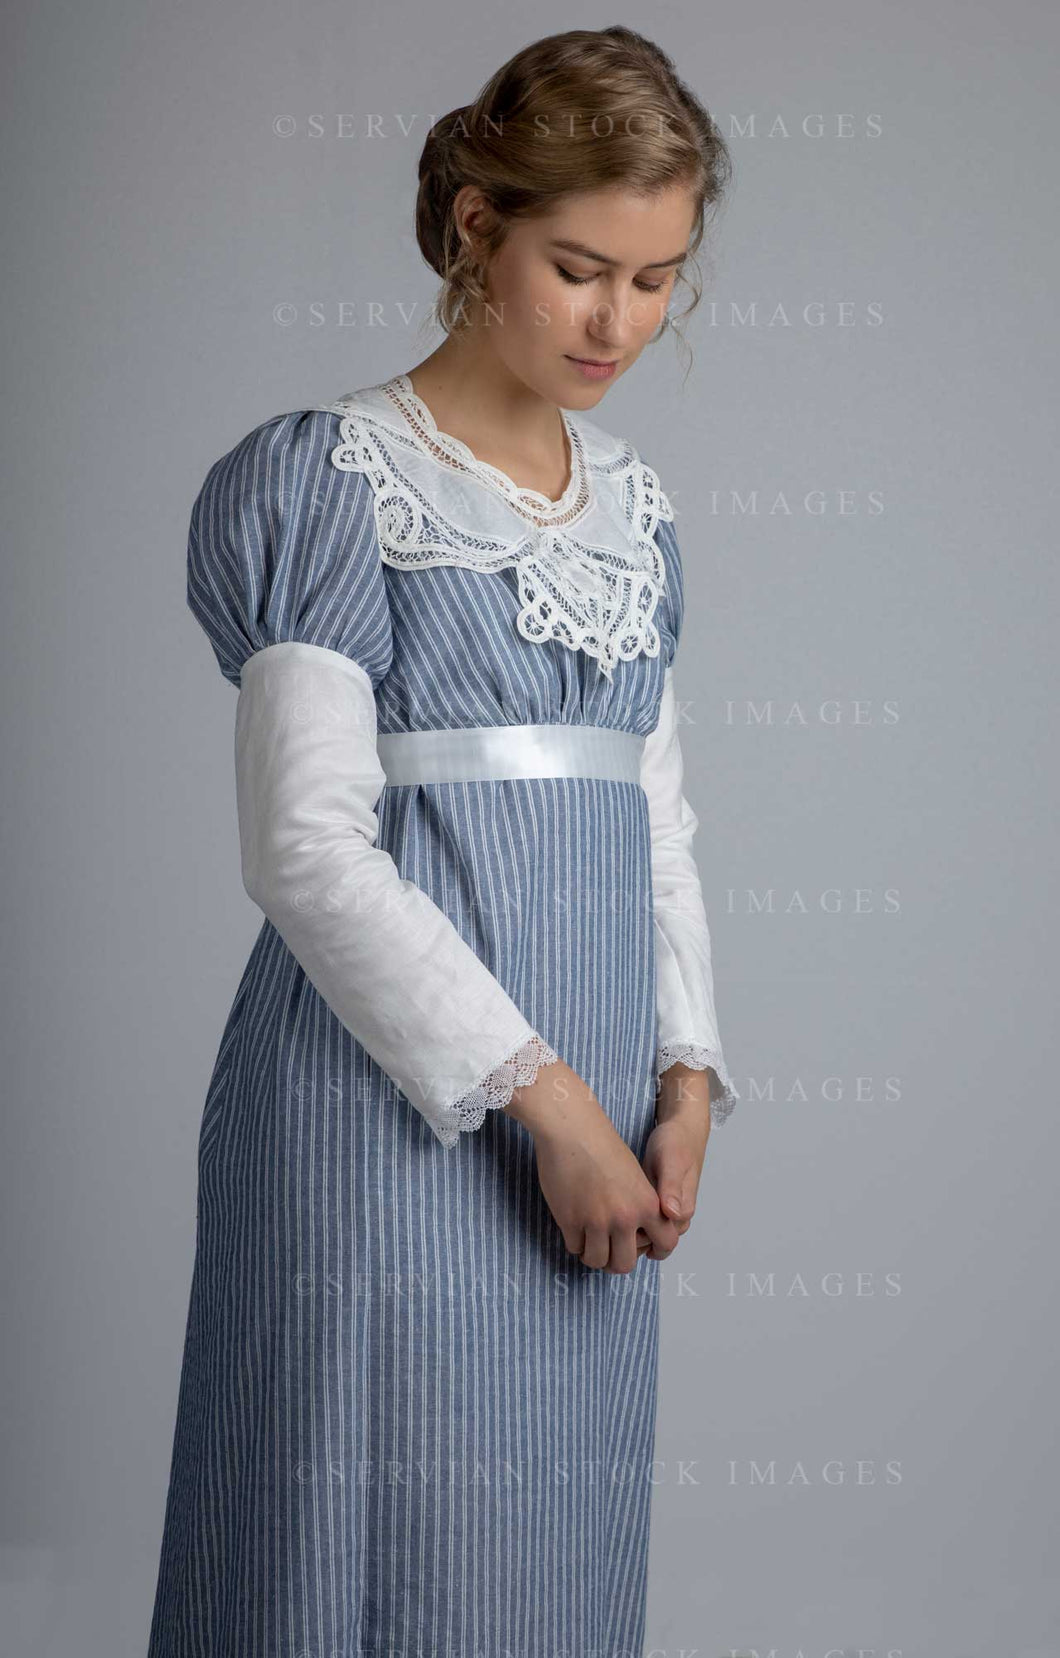 Regency woman in a striped cotton dress with a lace collar (Amalia 0602)